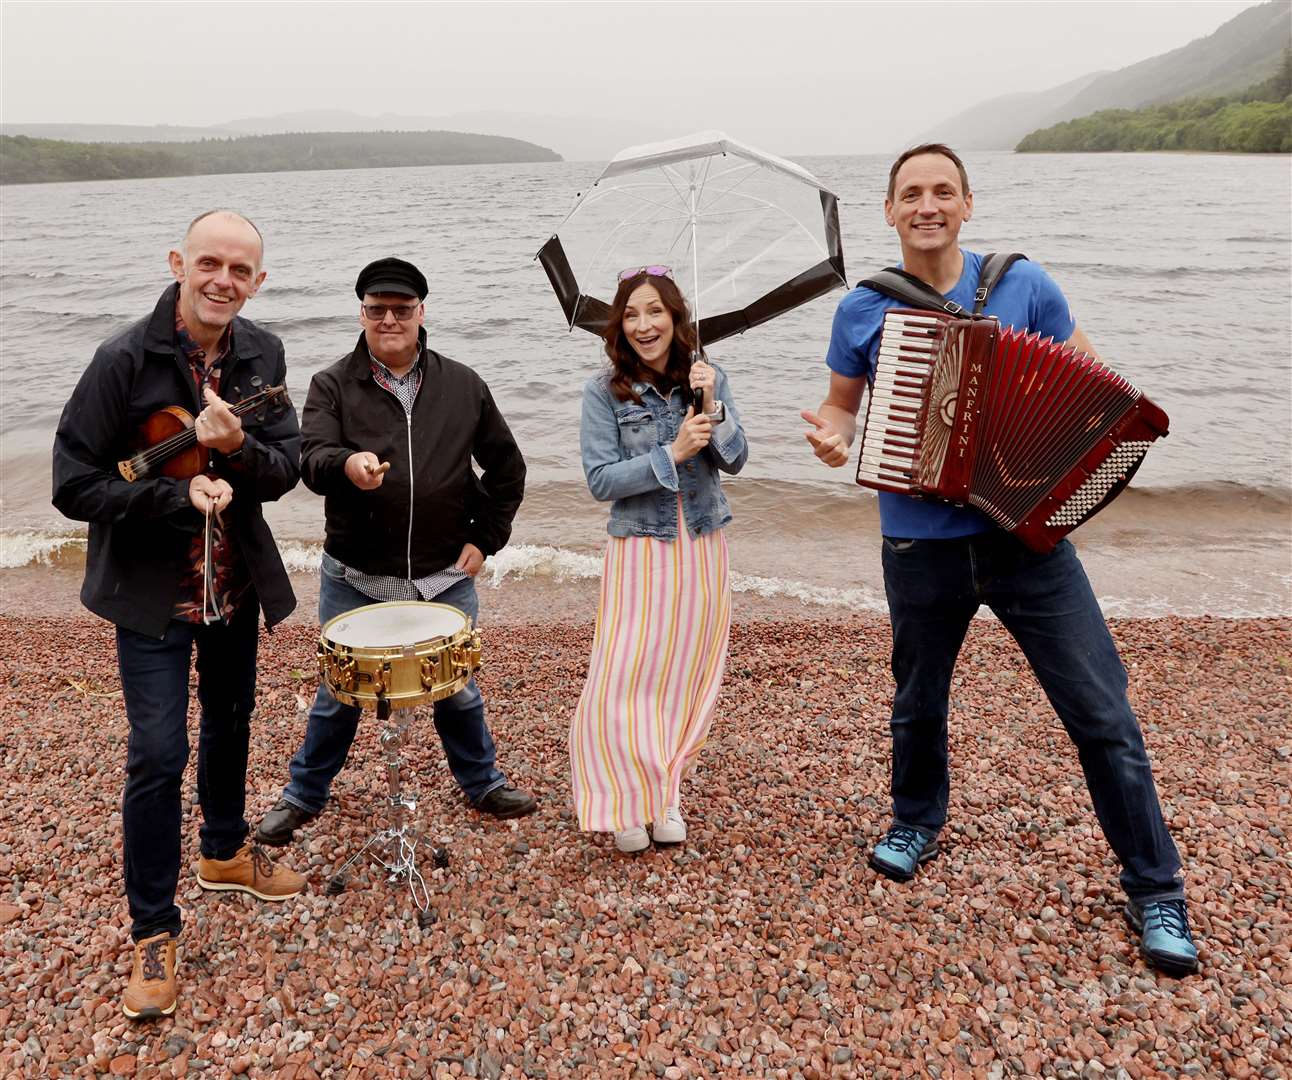 Musicians from the Highlands and Islands will play at the event focusing on Runrig this year. From left Duncan Chisholm, Iain Bayne, Julie Fowlis and Gary Innes of Manran.